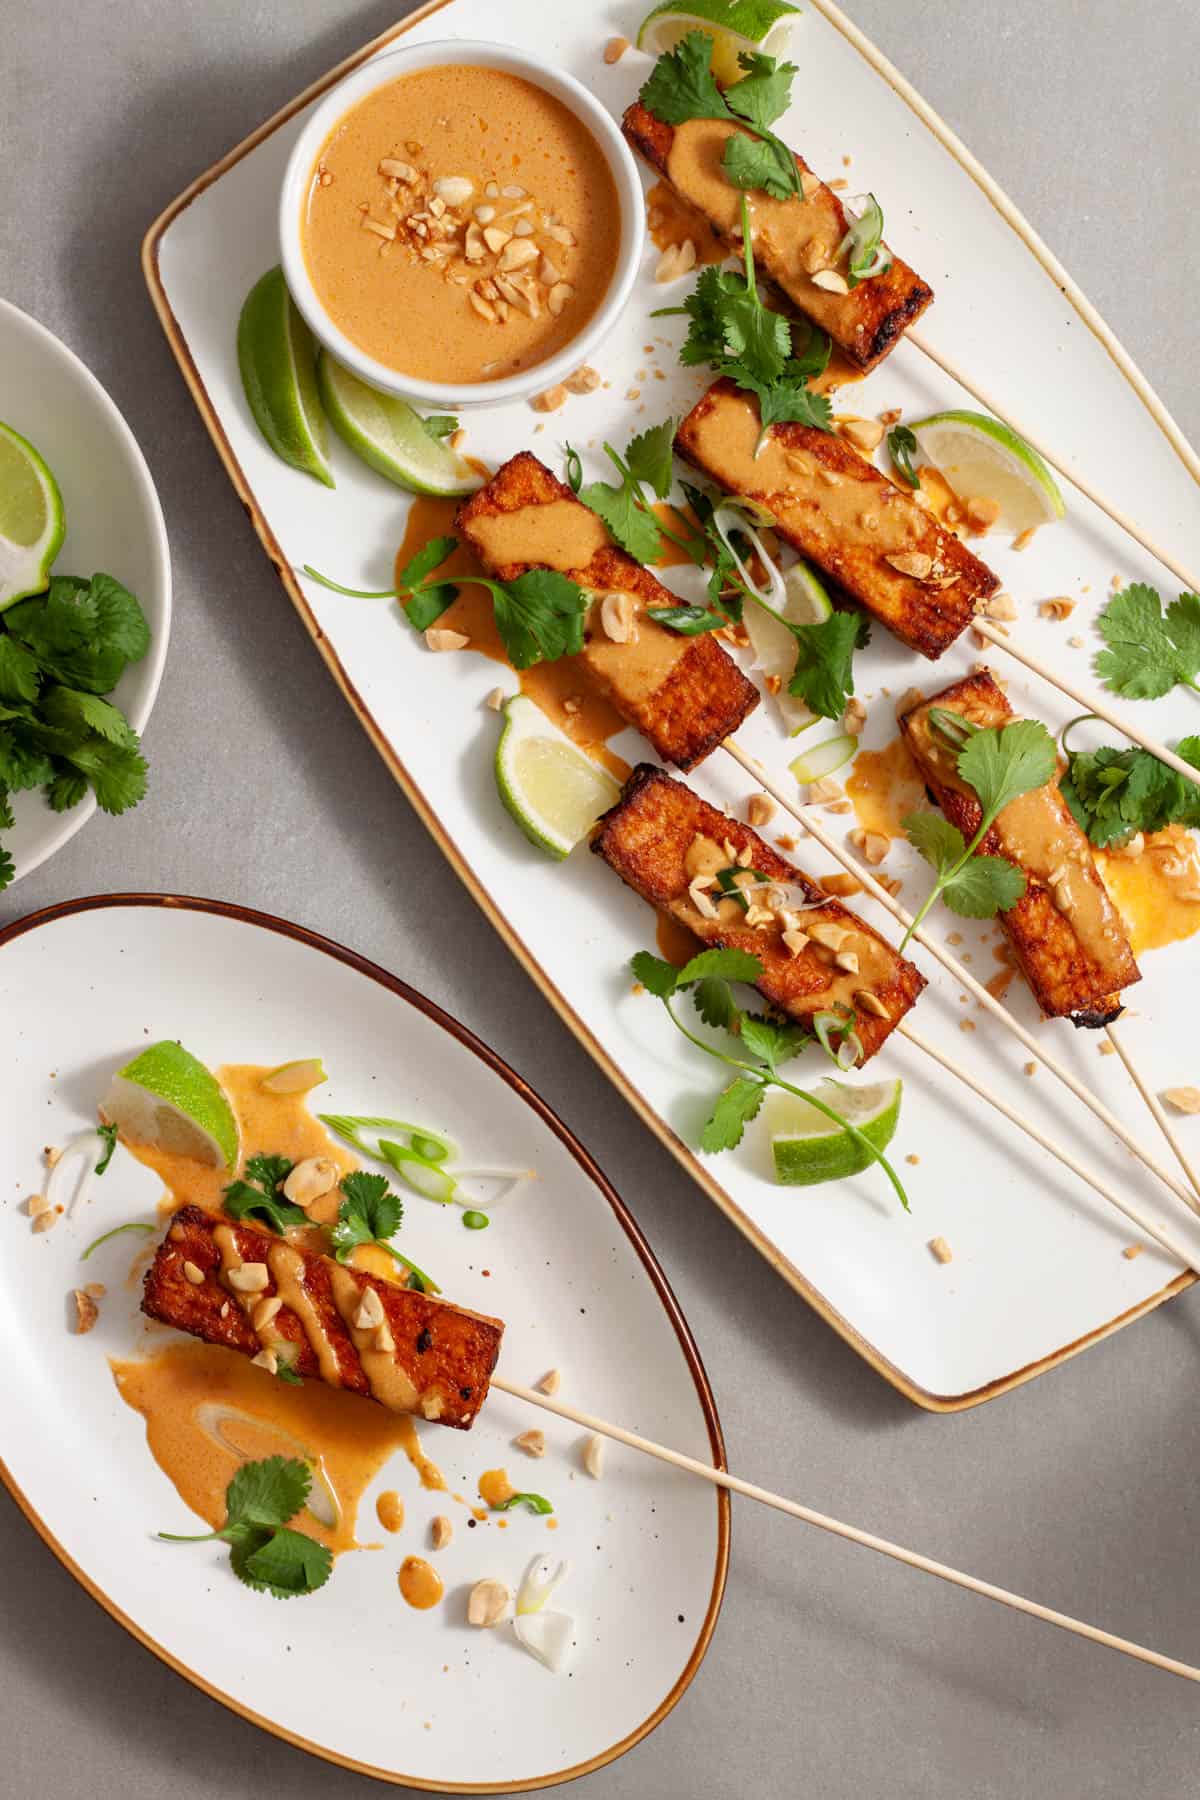 A platter and small plate with tofu satay topped with herbs, peanut sauce and chopped peanuts.